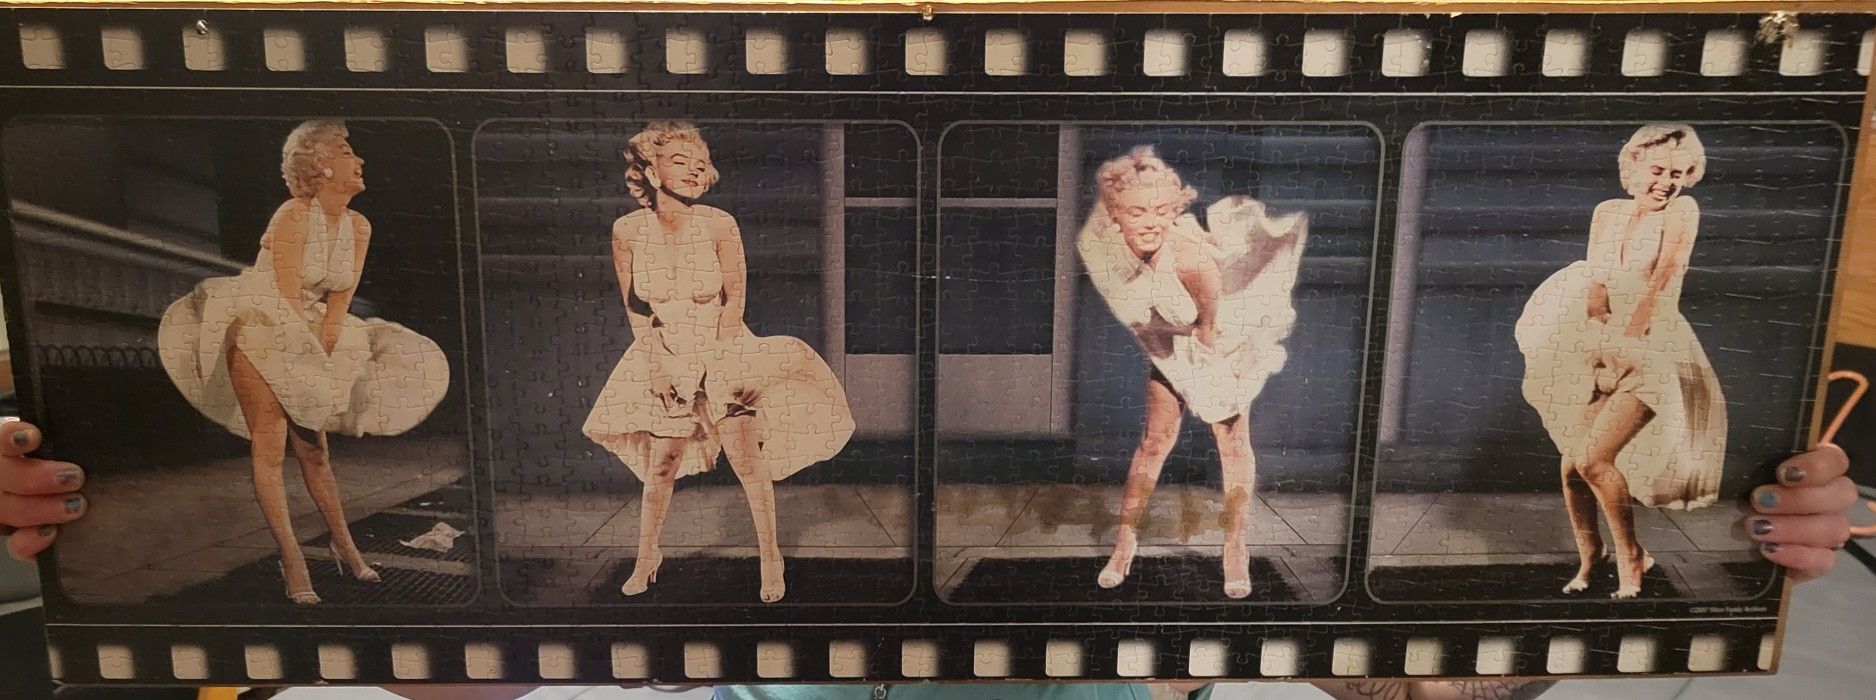 Marilyn Monroe 1000pc Puzzle 2007 